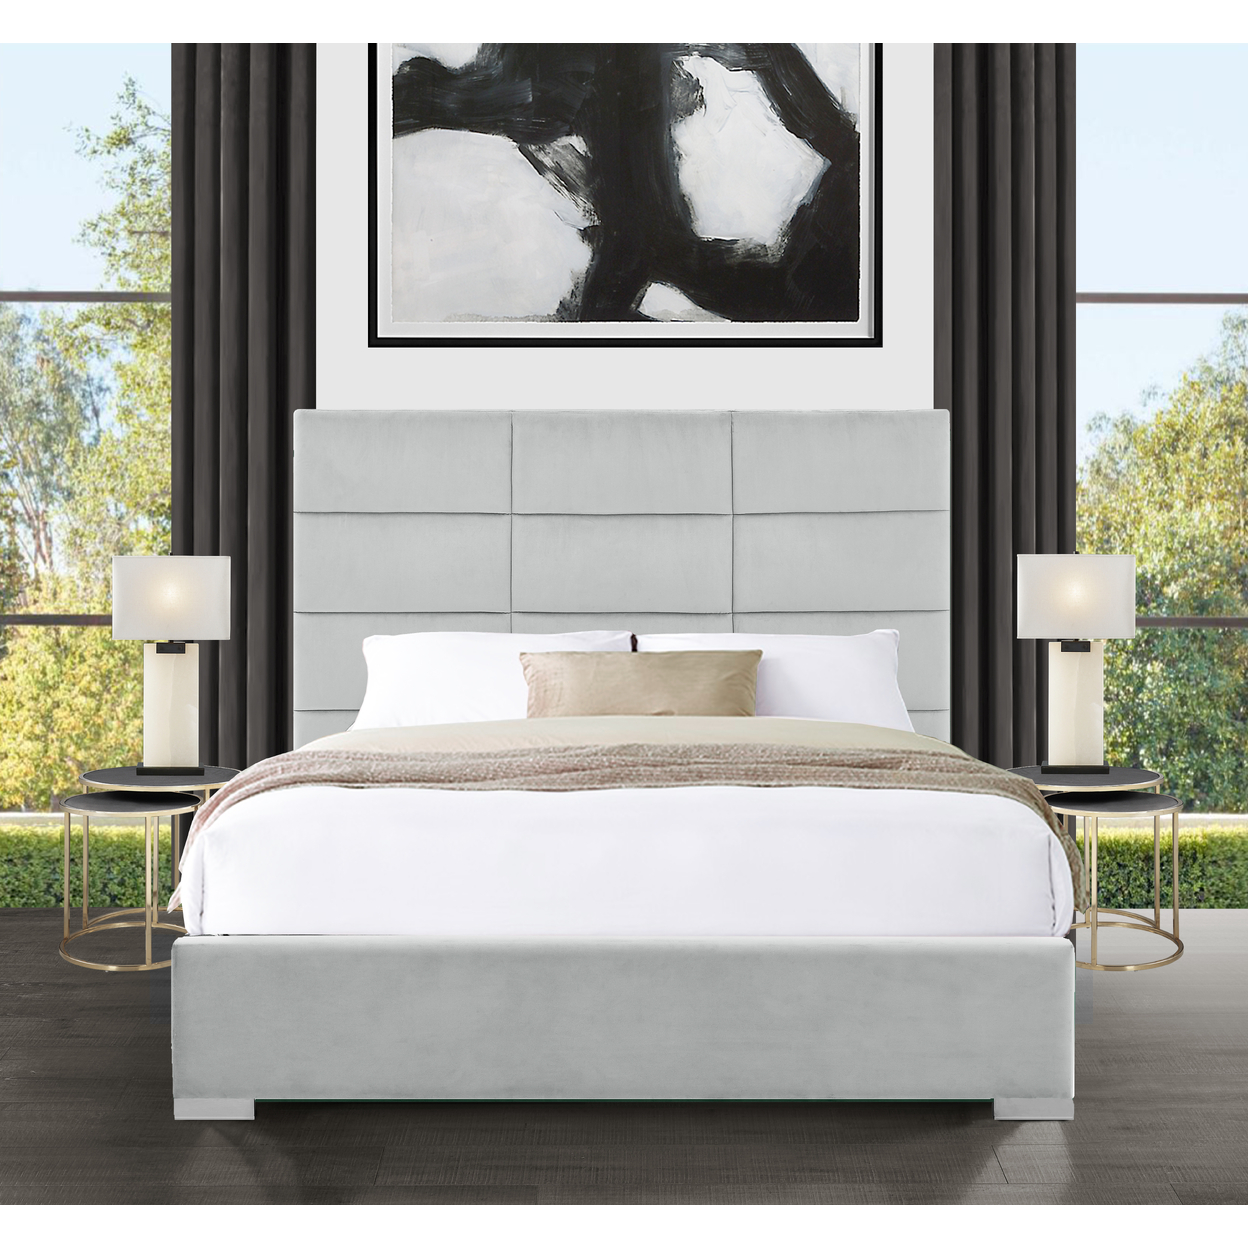 Iconic Home Durazzo Storage Platform Bed Frame With Headboard Velvet Upholstered Box Quilted, Modern Contemporary - Silver, Queen